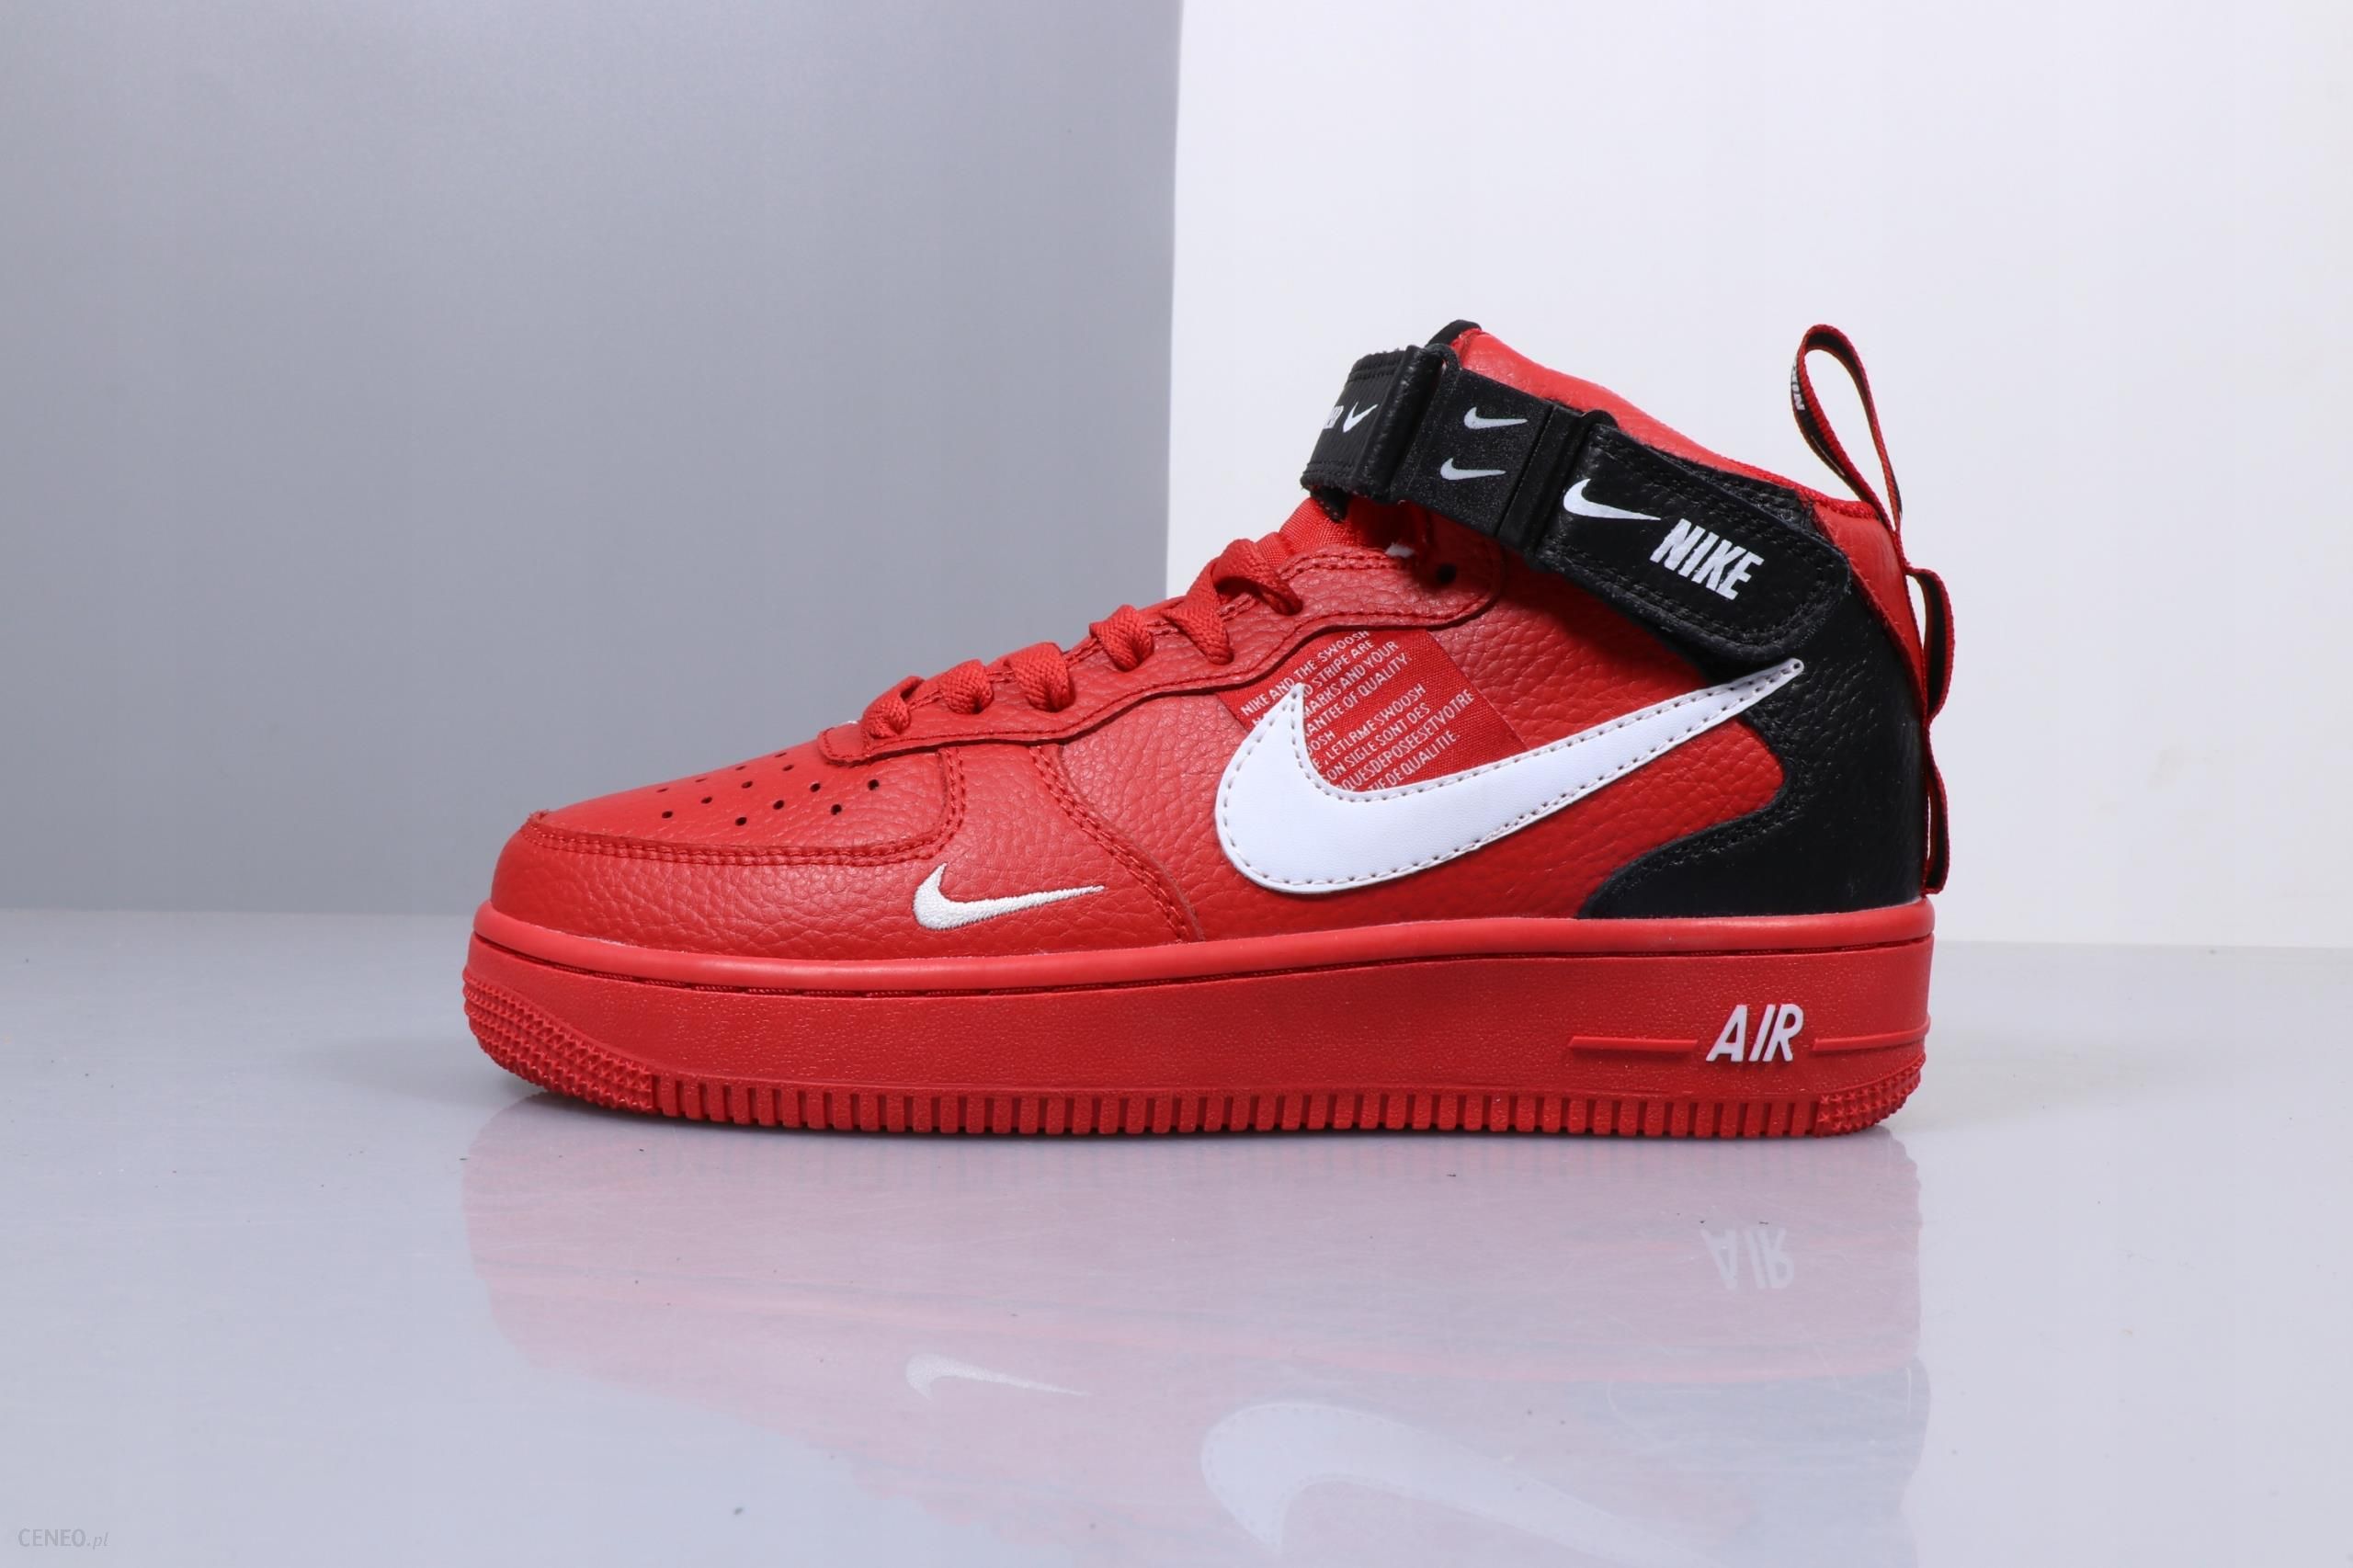 Nike Air Force 1 High 07 LV8 Utility - Ceny i opinie - Ceneo.pl